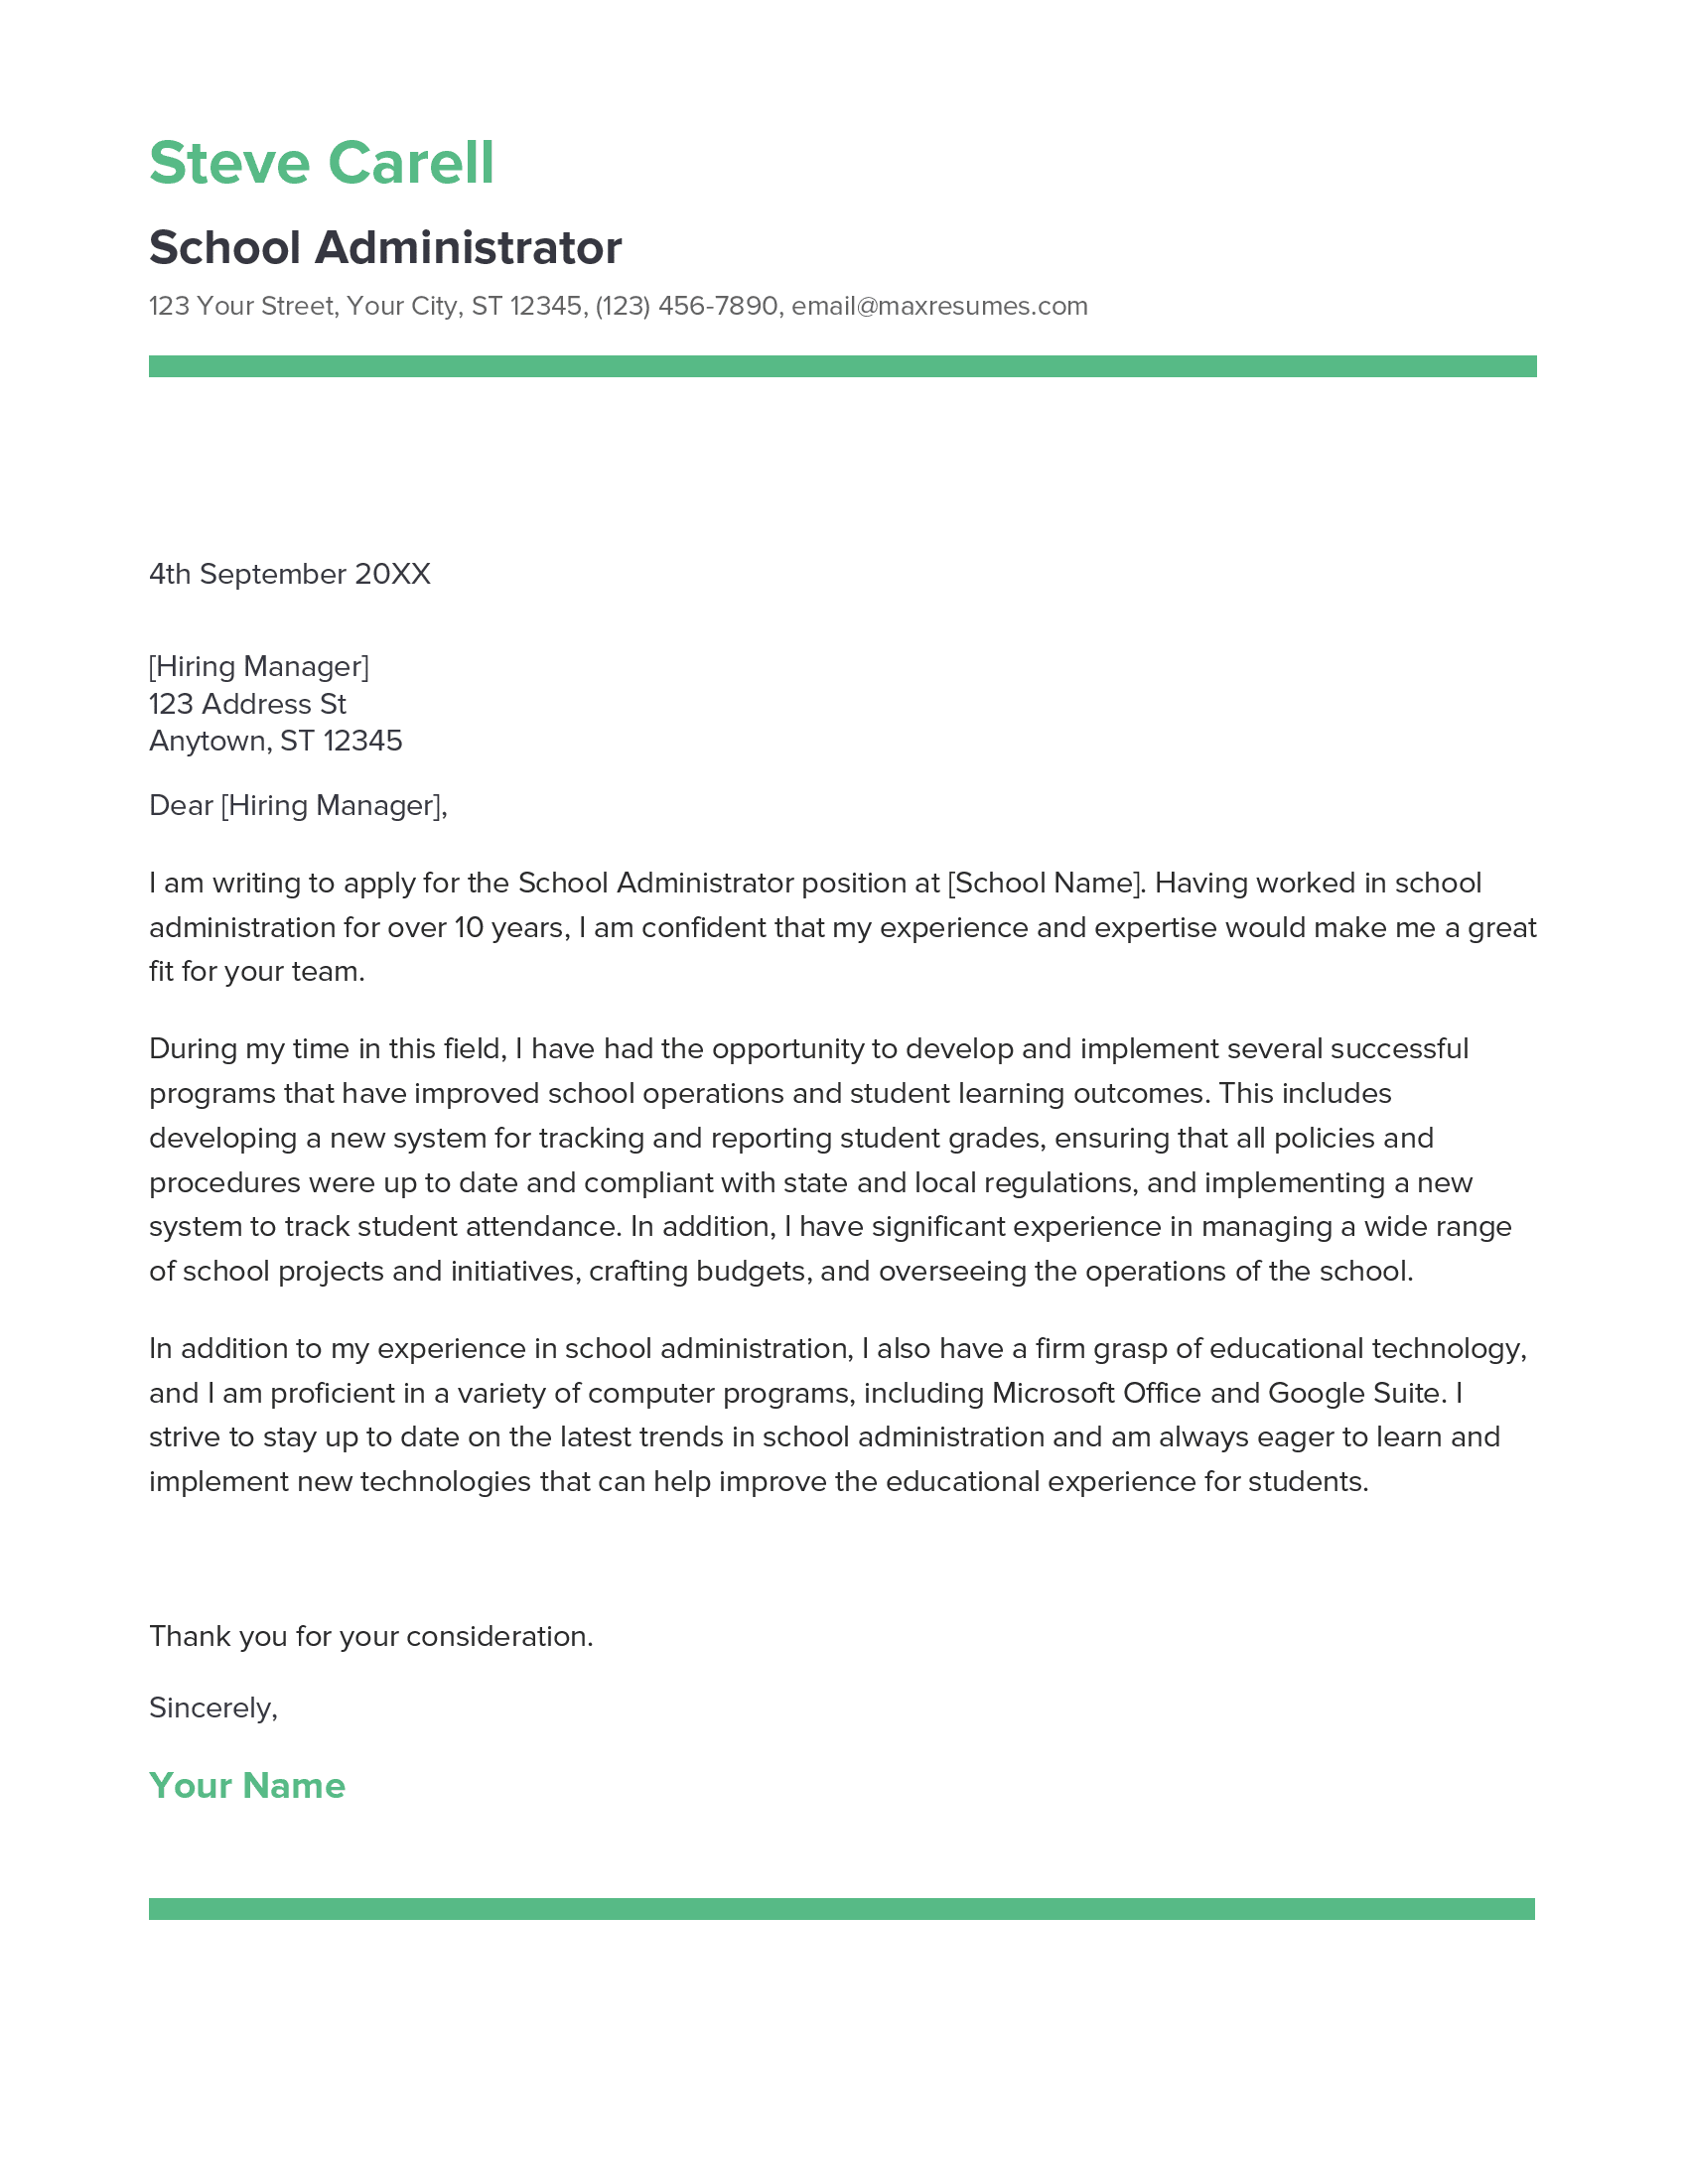 School Administrator Cover Letter Example